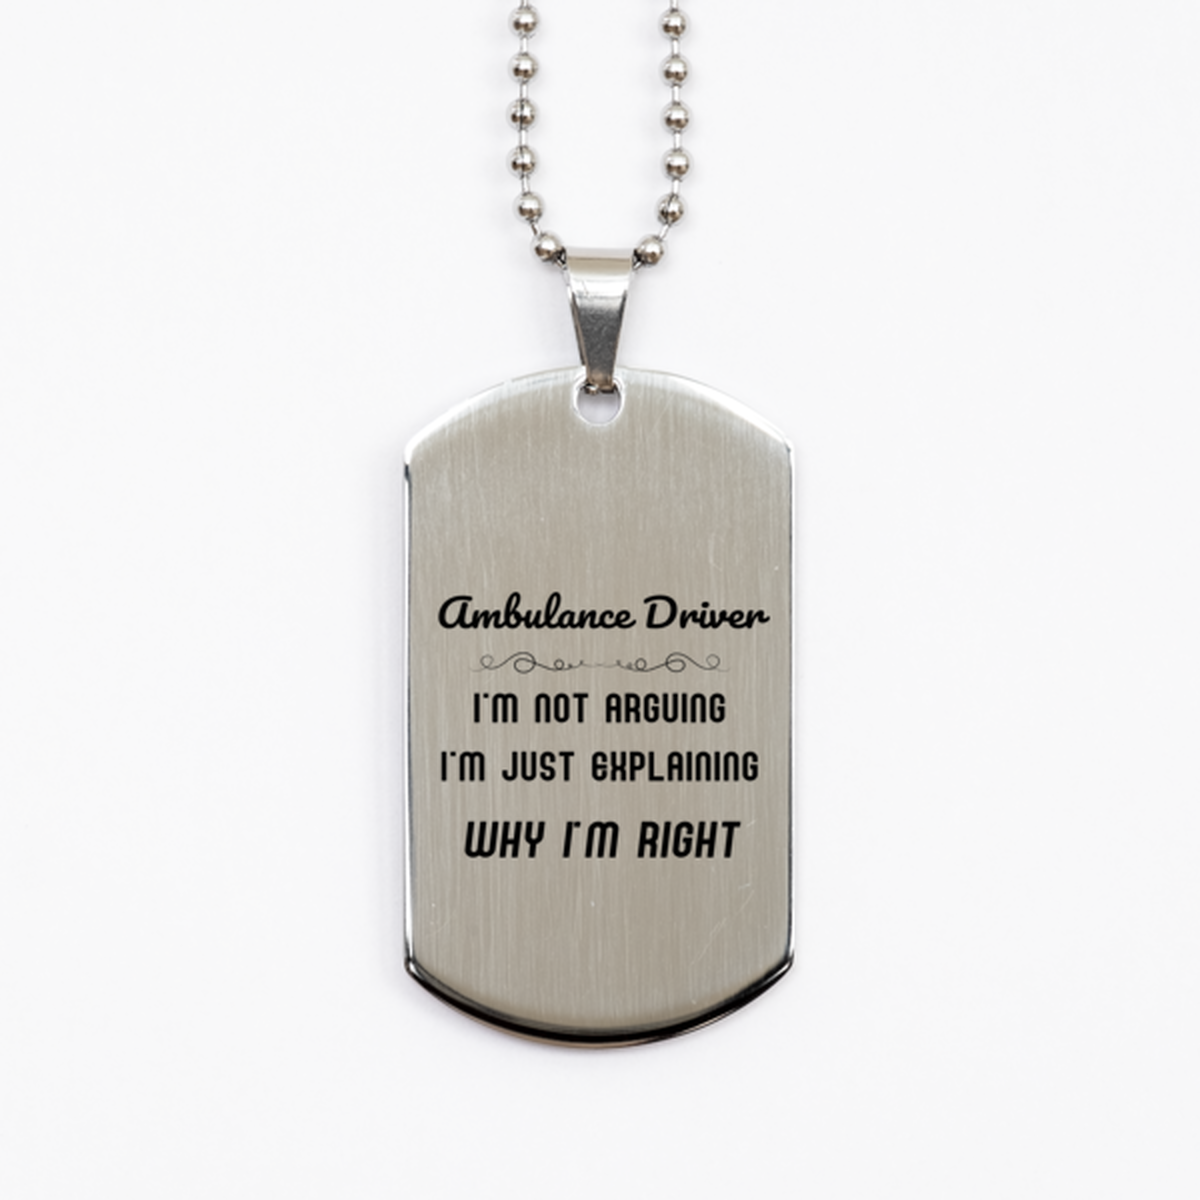 Ambulance Driver I'm not Arguing. I'm Just Explaining Why I'm RIGHT Silver Dog Tag, Funny Saying Quote Ambulance Driver Gifts For Ambulance Driver Graduation Birthday Christmas Gifts for Men Women Coworker